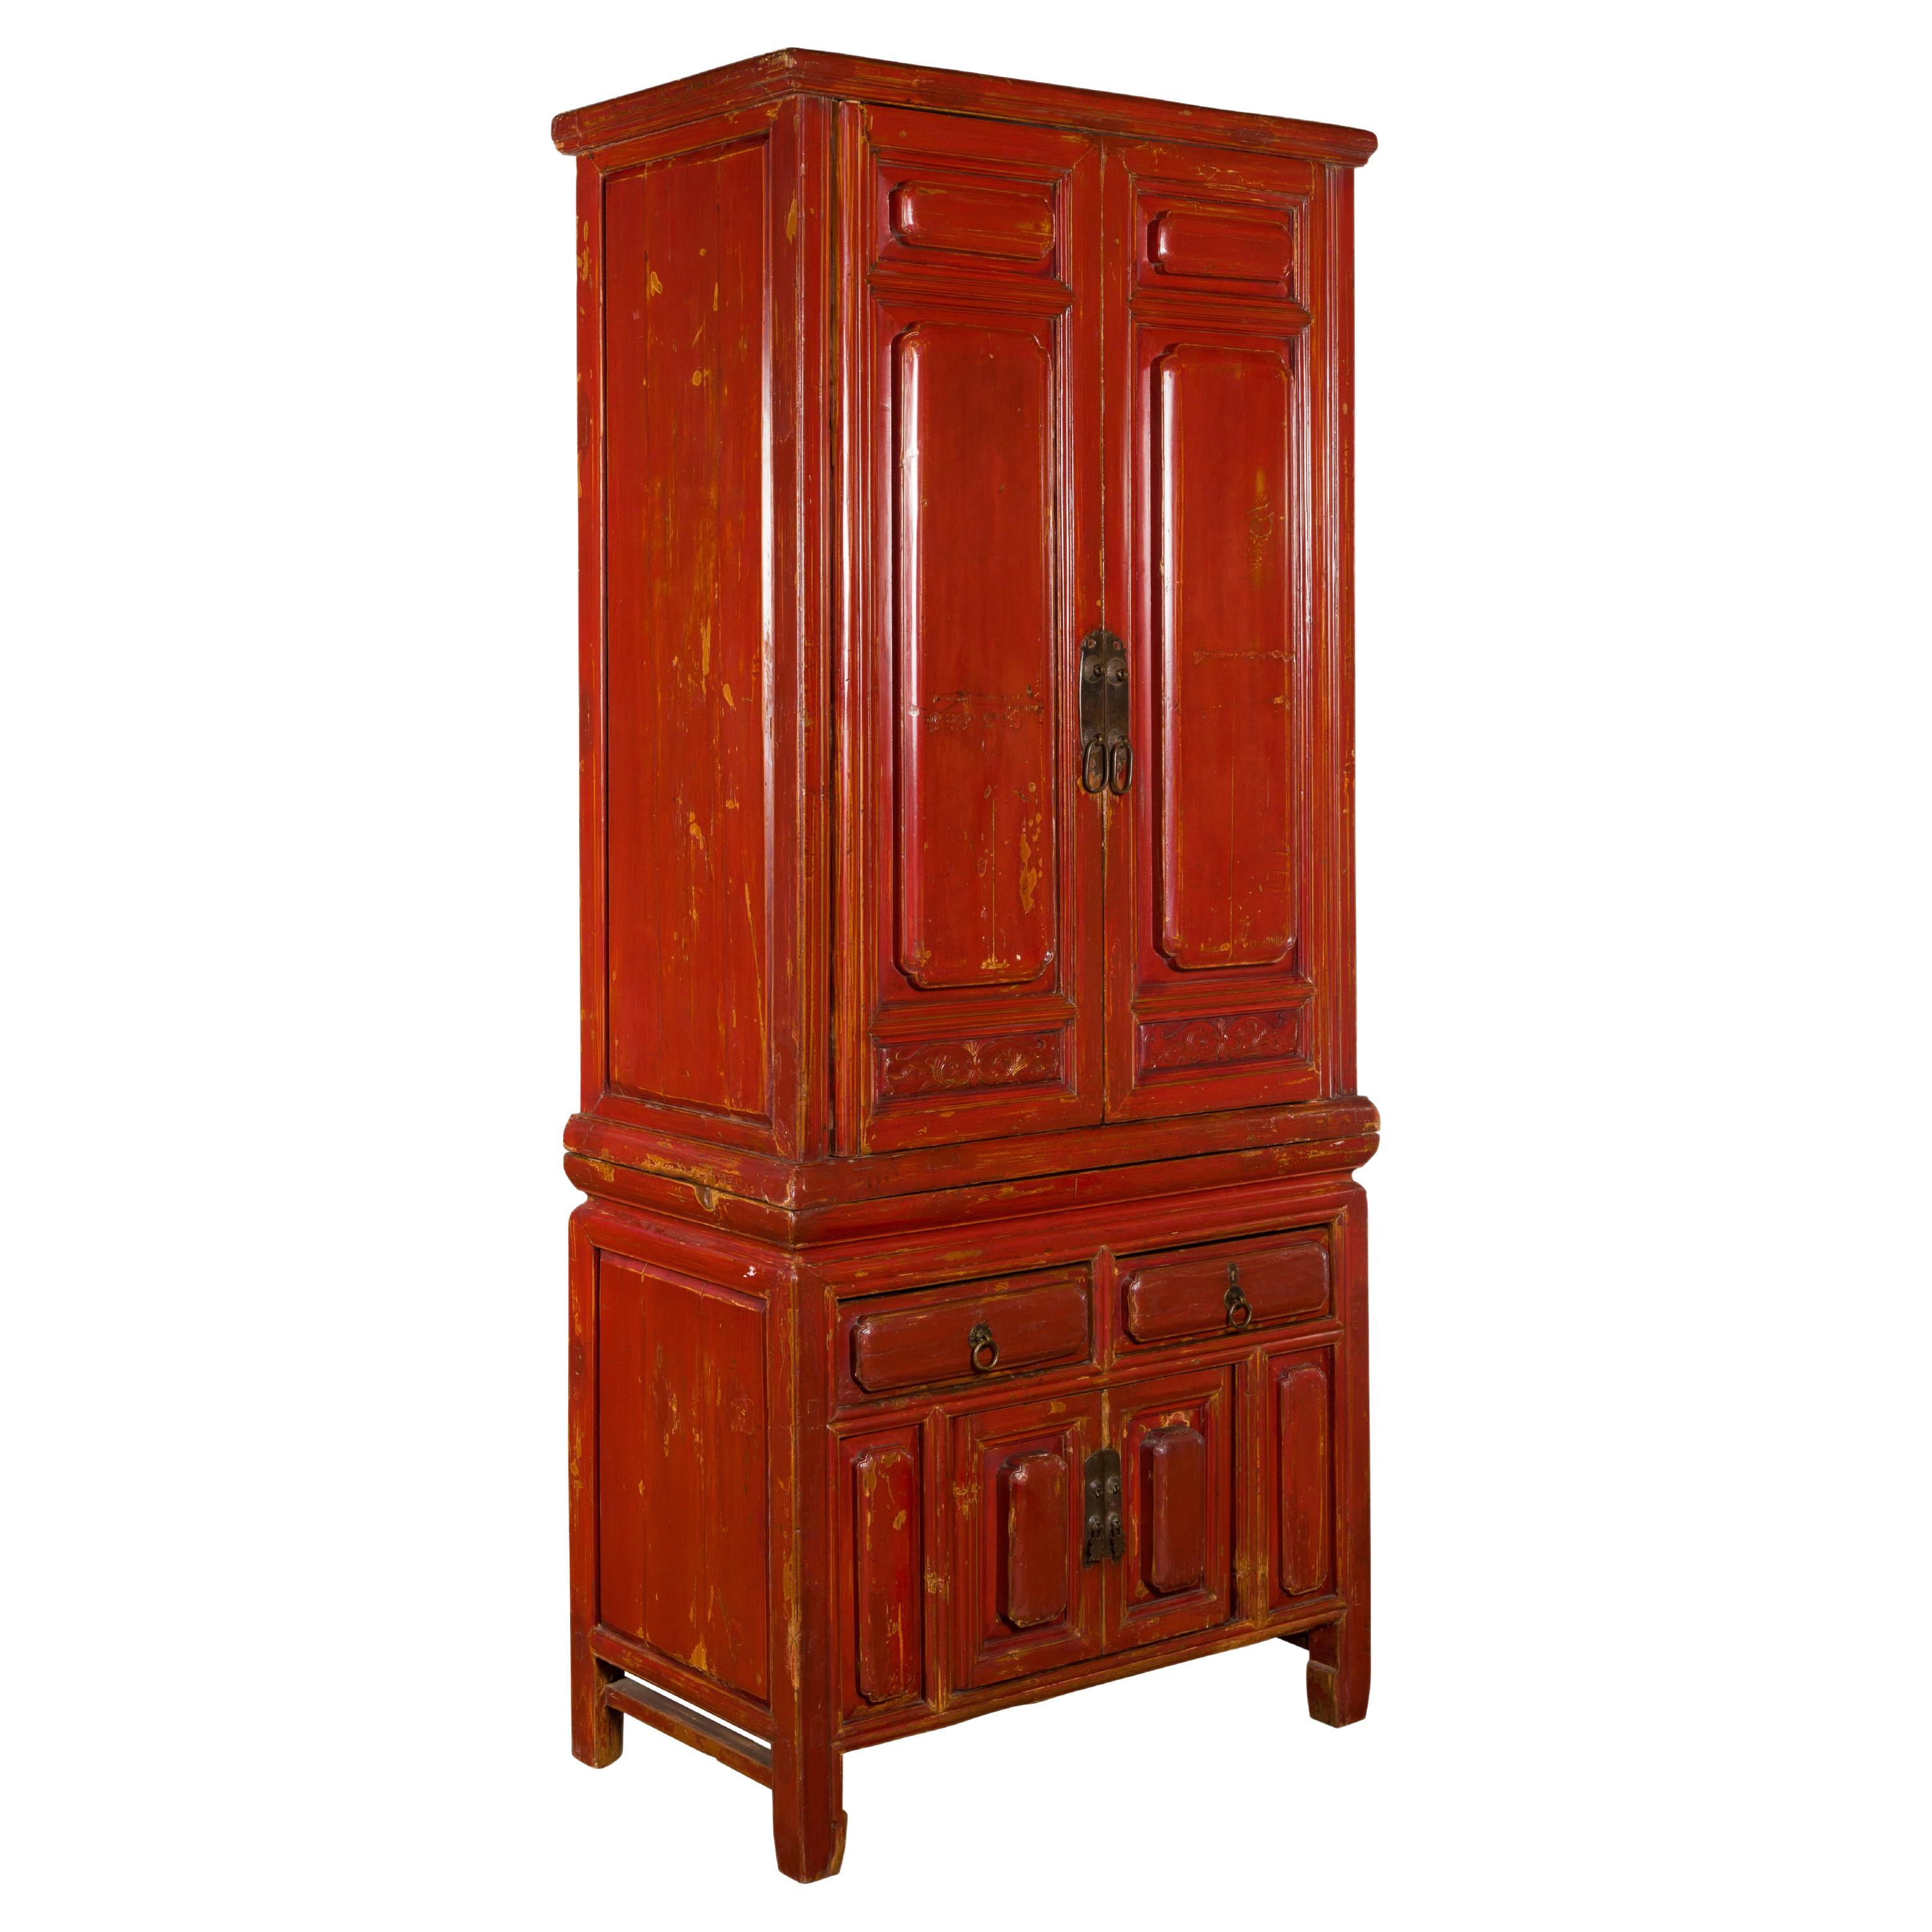 Late Qing Dynasty Period Chinese Red Lacquer Compound Cabinet with Raised Panels